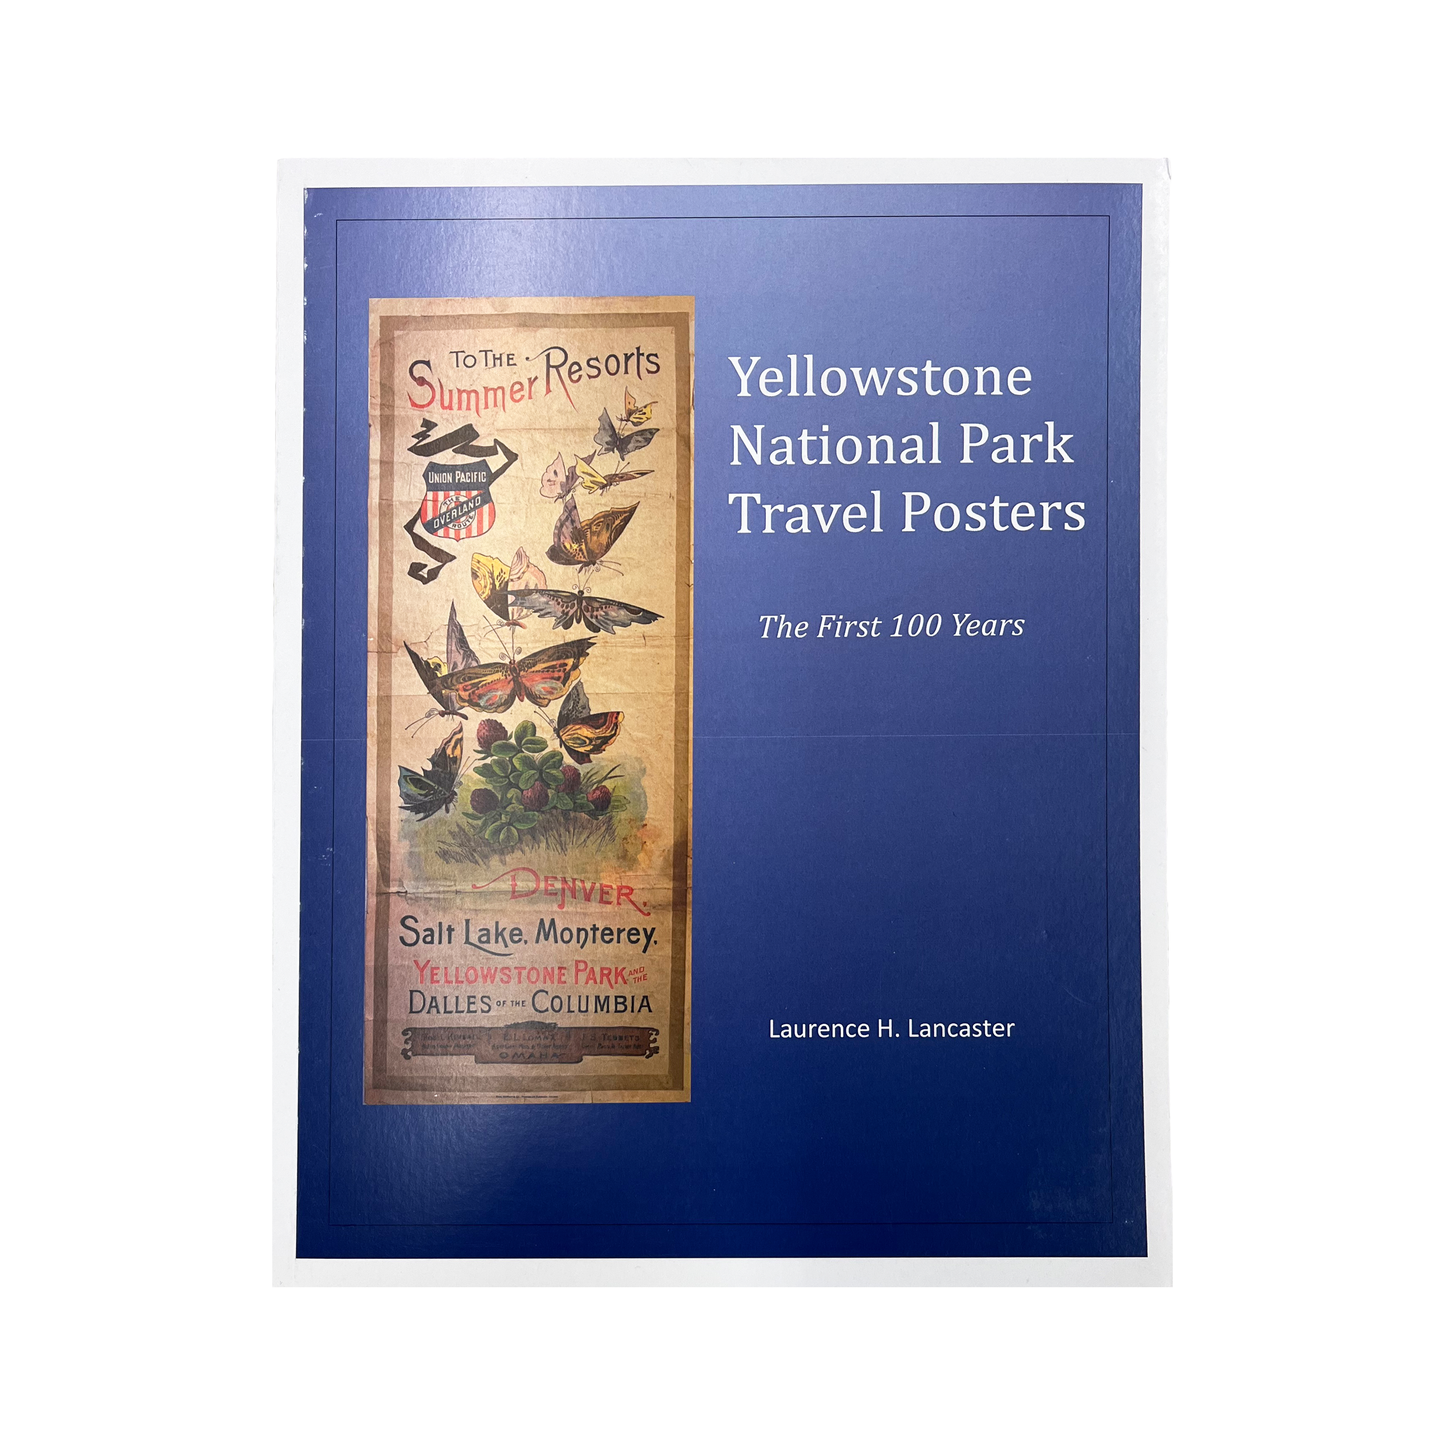 Yellowstone National Park Travel Posters